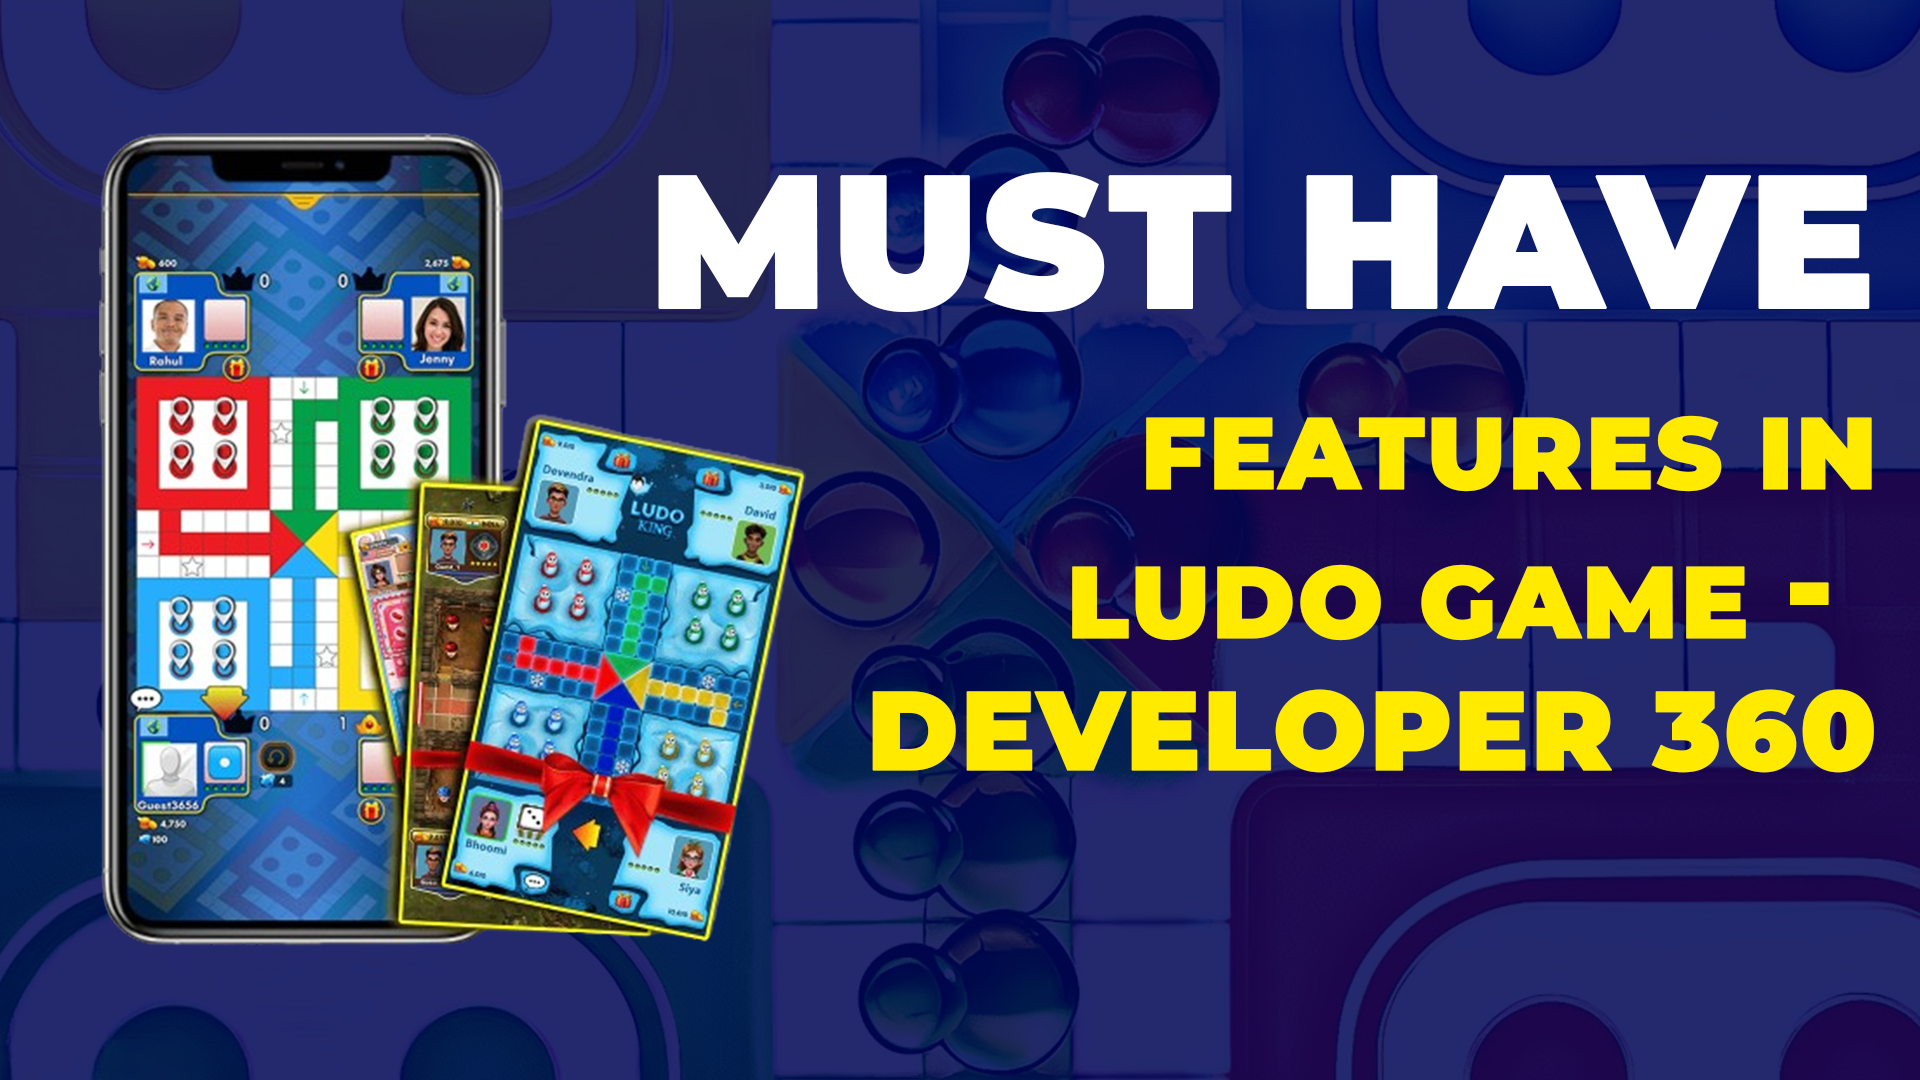 Must Have Features in Ludo Game - Developer 360